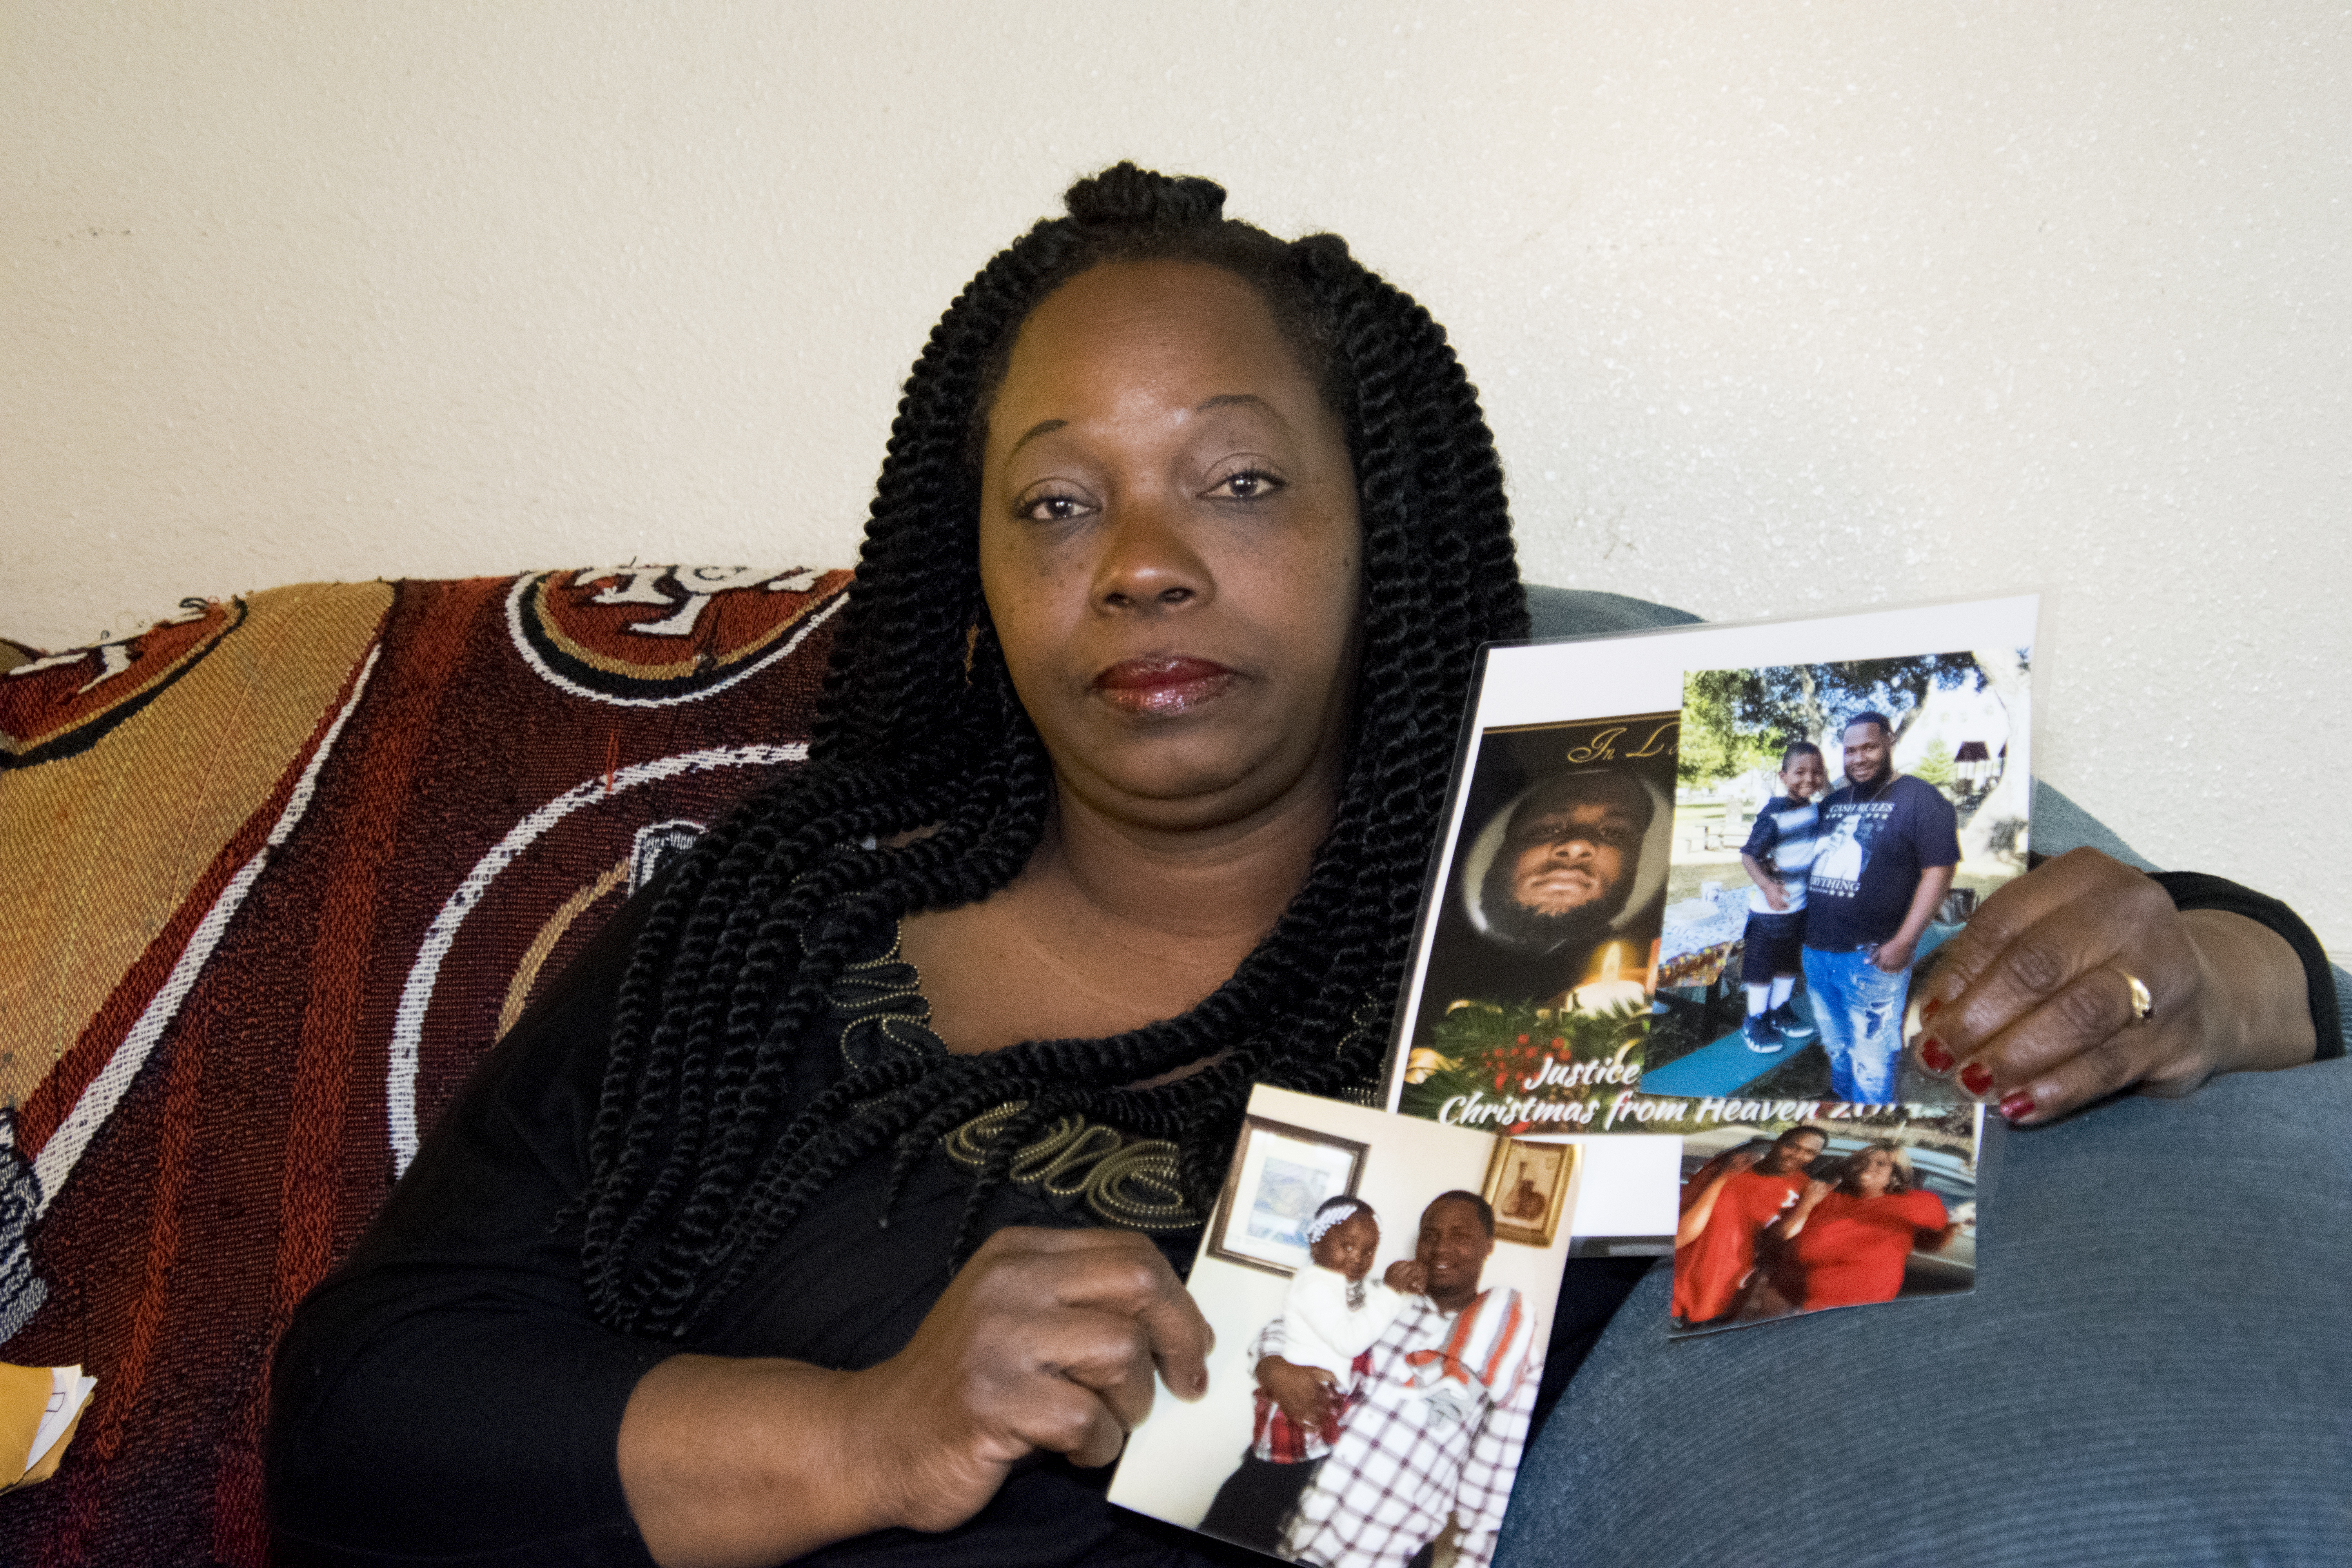 Barbara Doss holding photos of her son, Dujuan Armstrong, who died at Santa Rita Jail. Photo by Scott Morris.